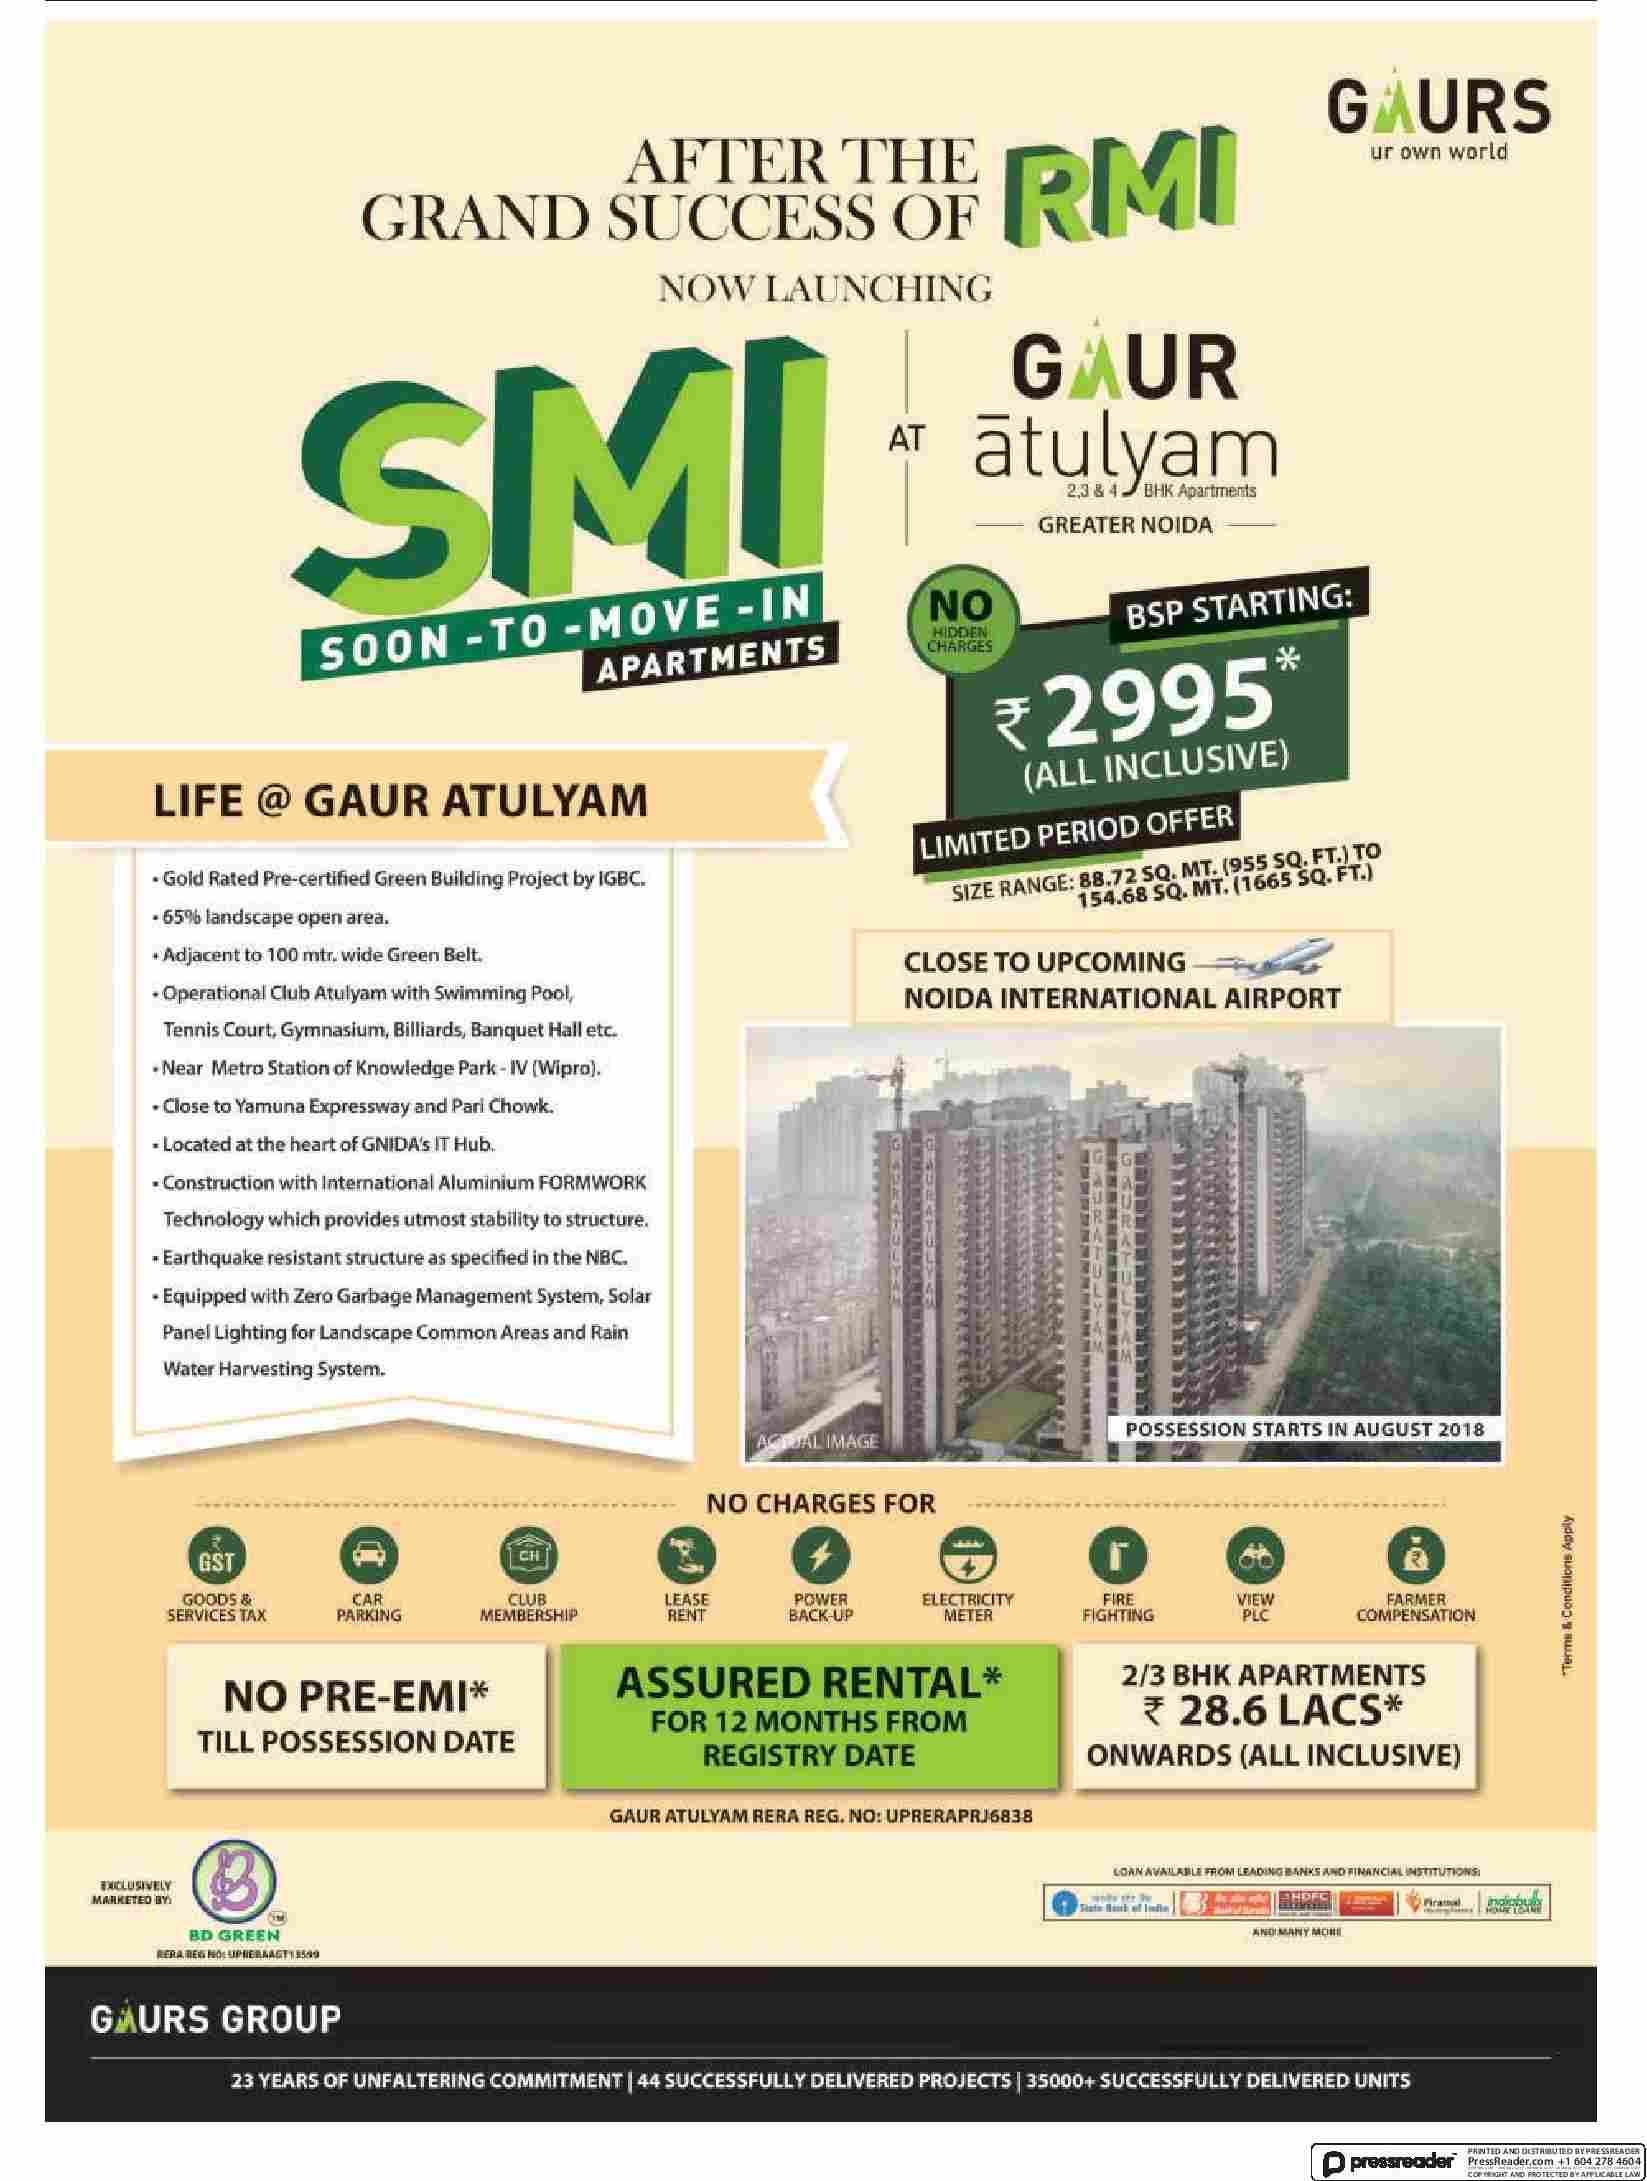 Pay no pre-EMI till possession at Gaur Atulyam in Greater Noida Update